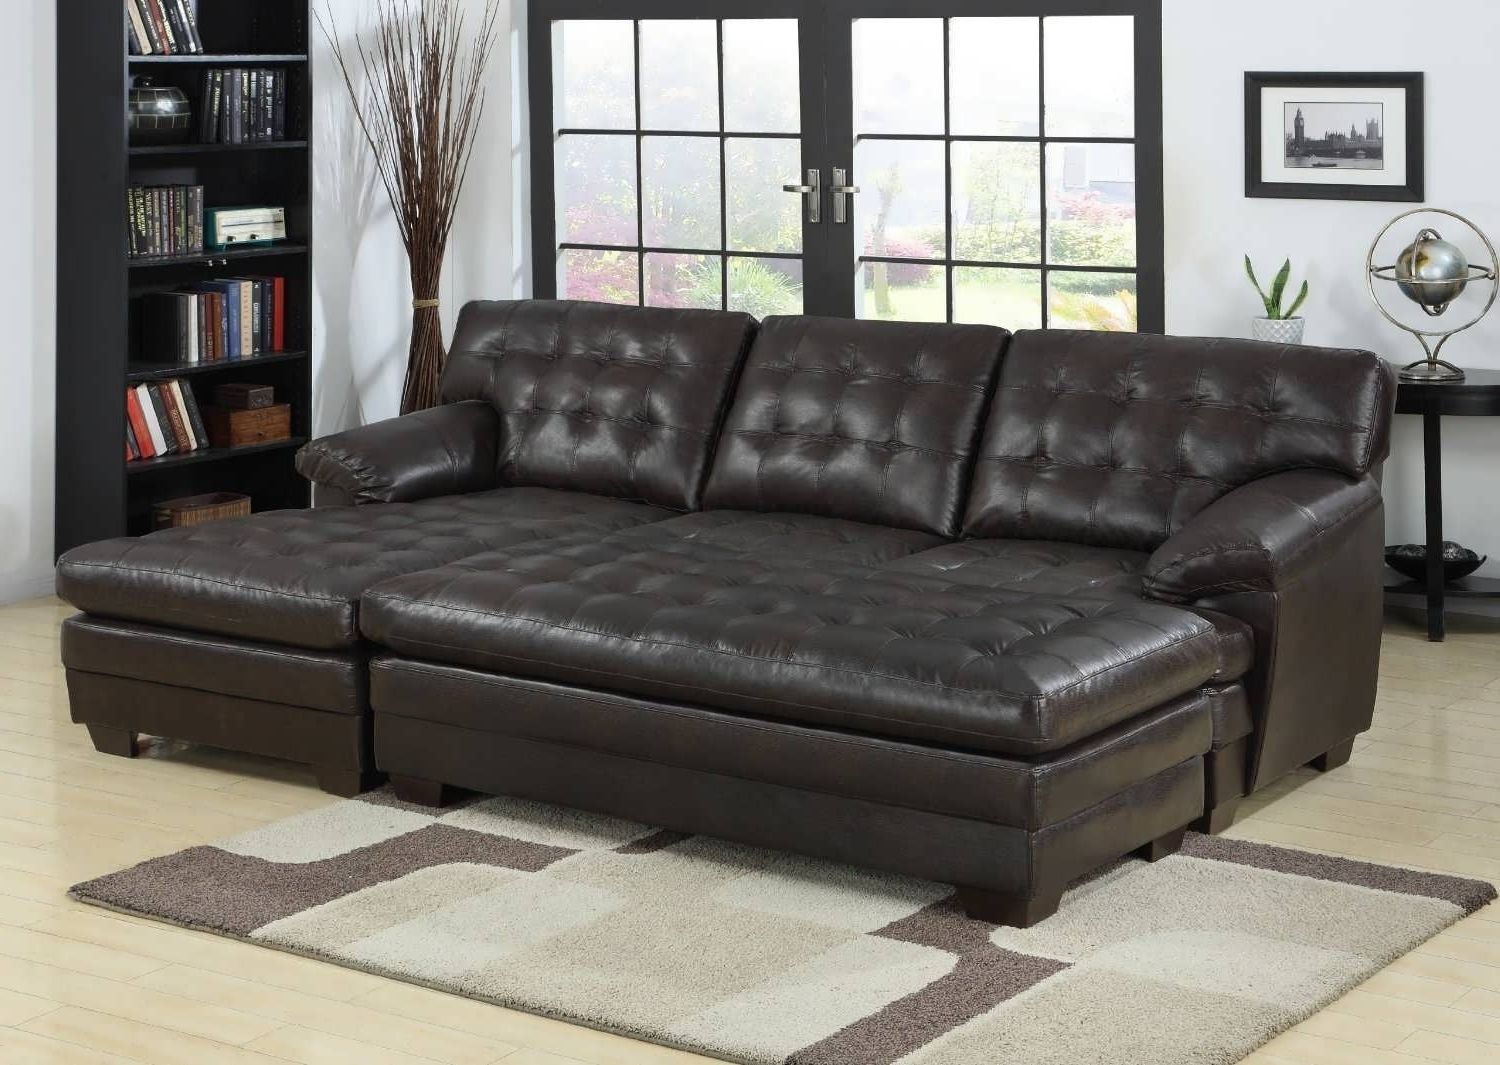 Chaise Lounge Sectionals Pertaining To Most Recent Sofa : Sectional Sofas Big Sectional Couch Wrap Around Couch Best (View 8 of 15)